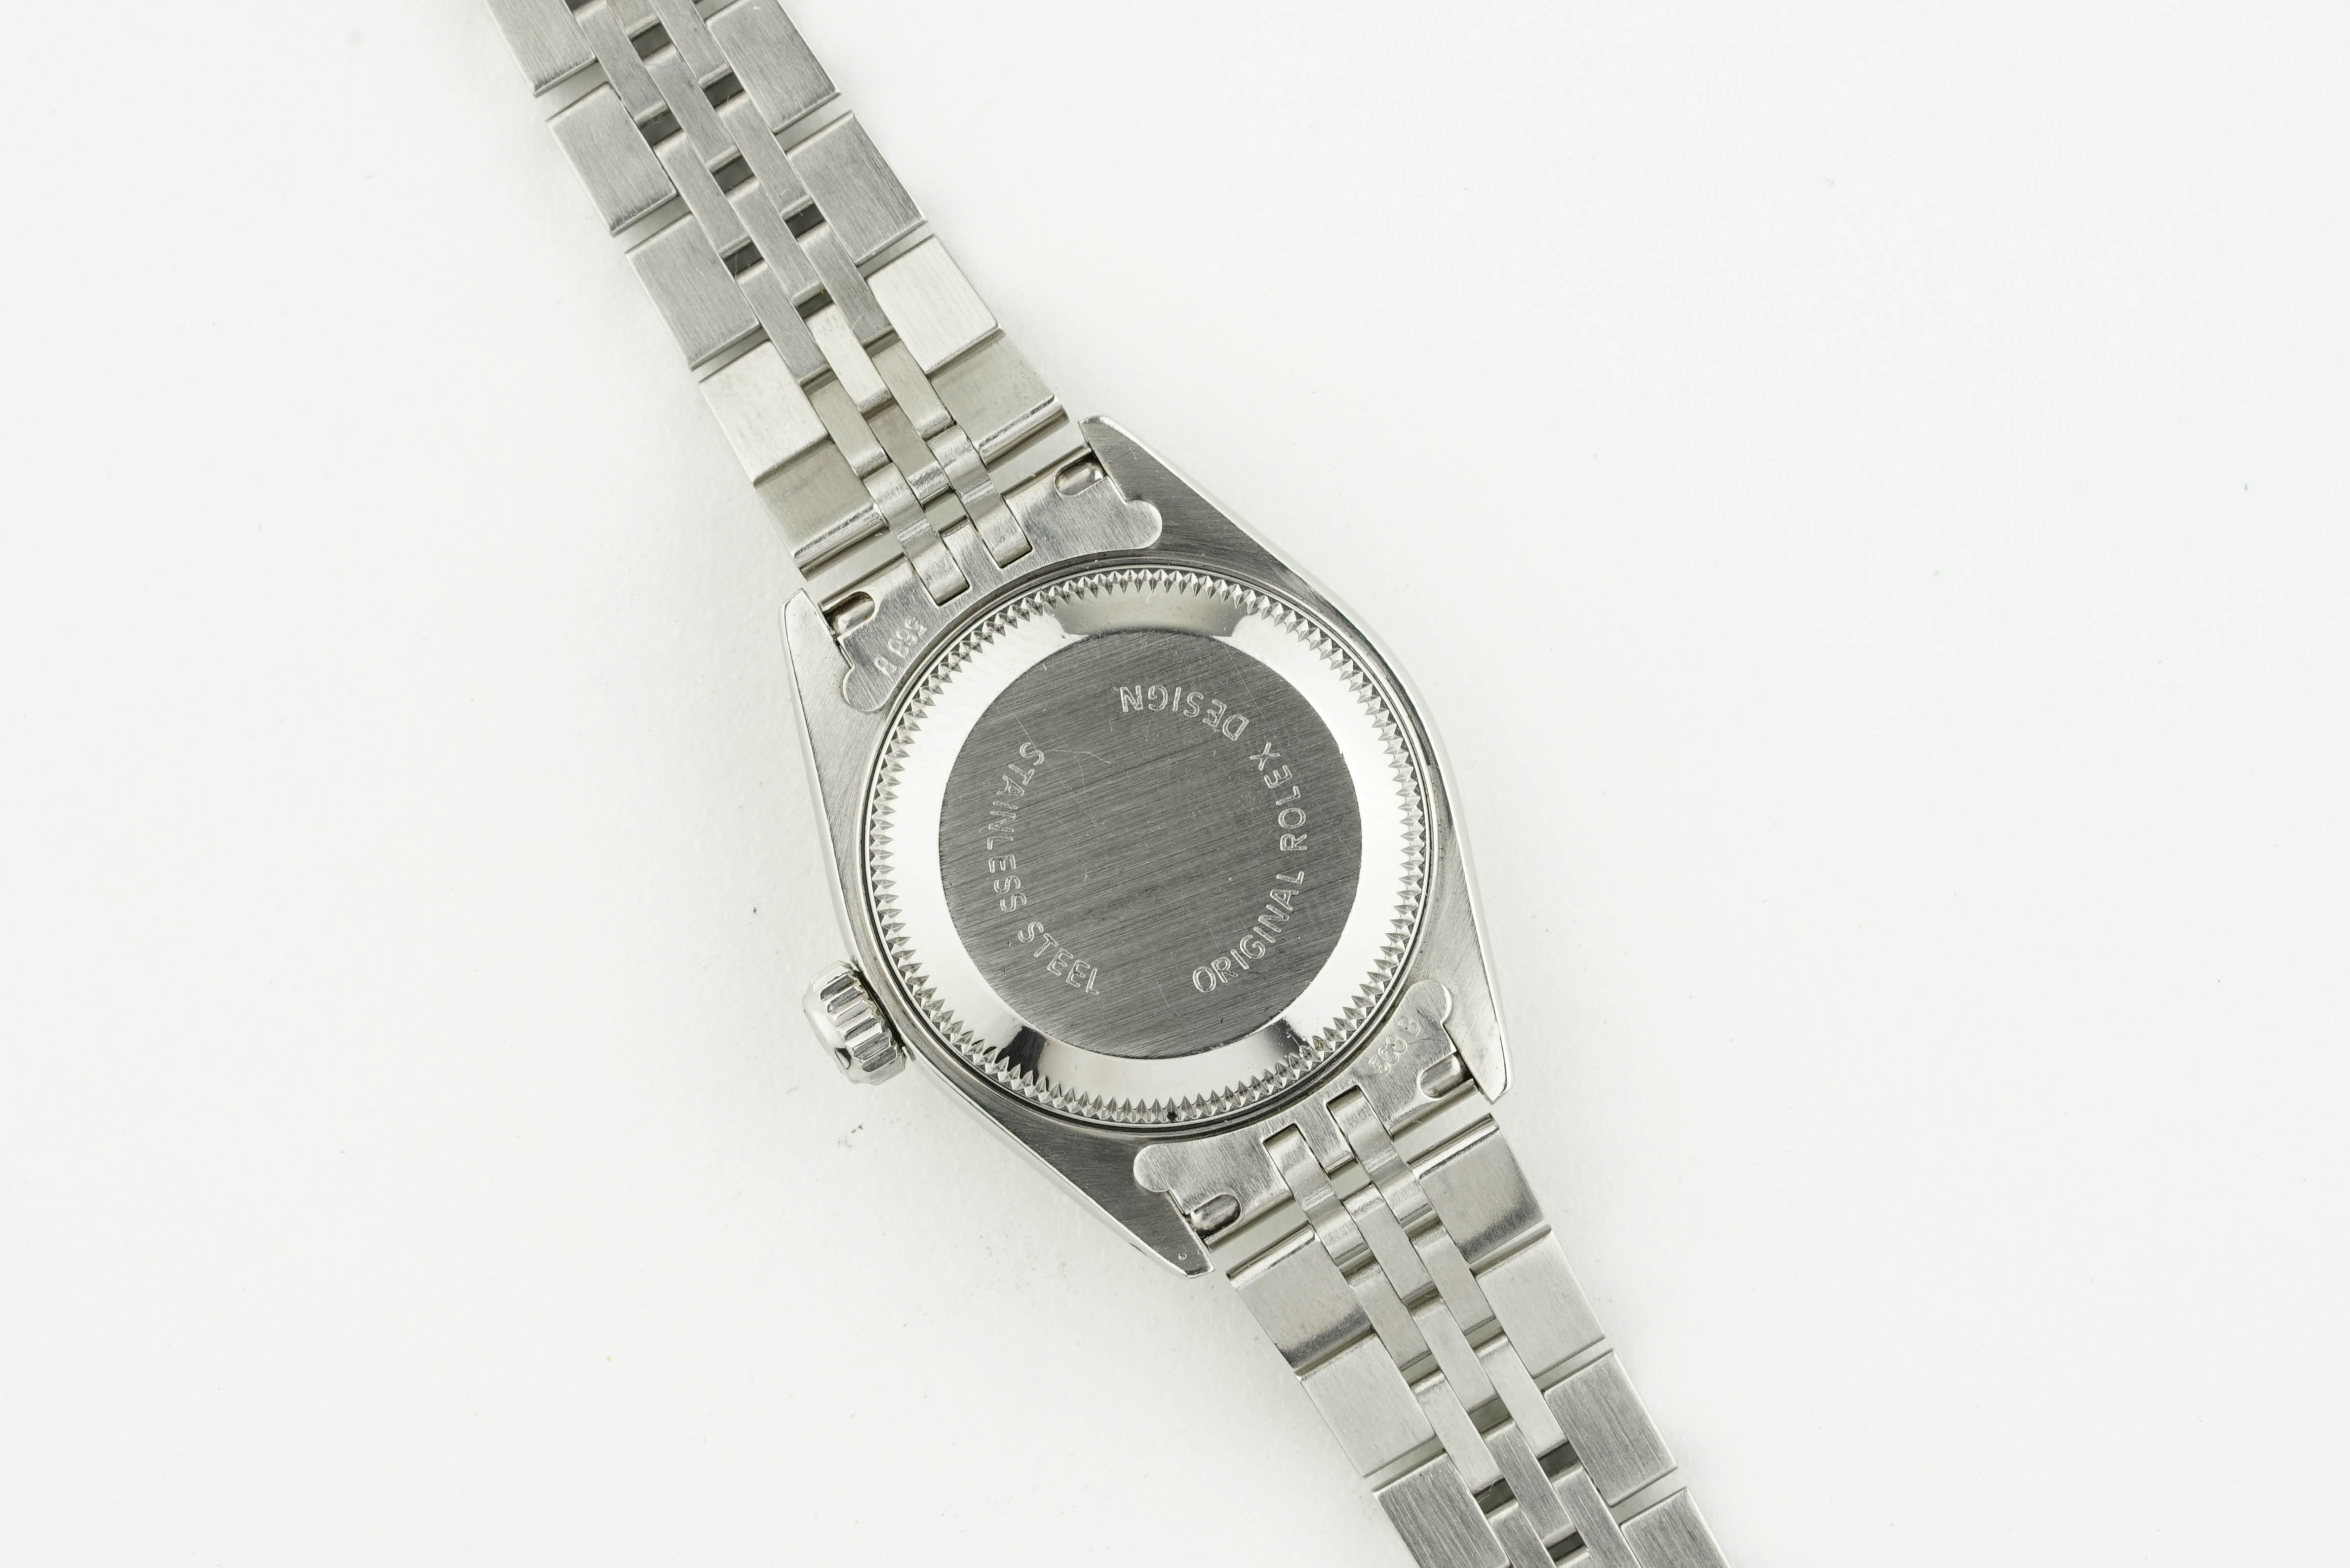 ROLEX OYSTER PERPETUAL DATEJUST W/ GUARANTEE PAPERS REF. 69174 CIRCA 1991 - Image 3 of 3